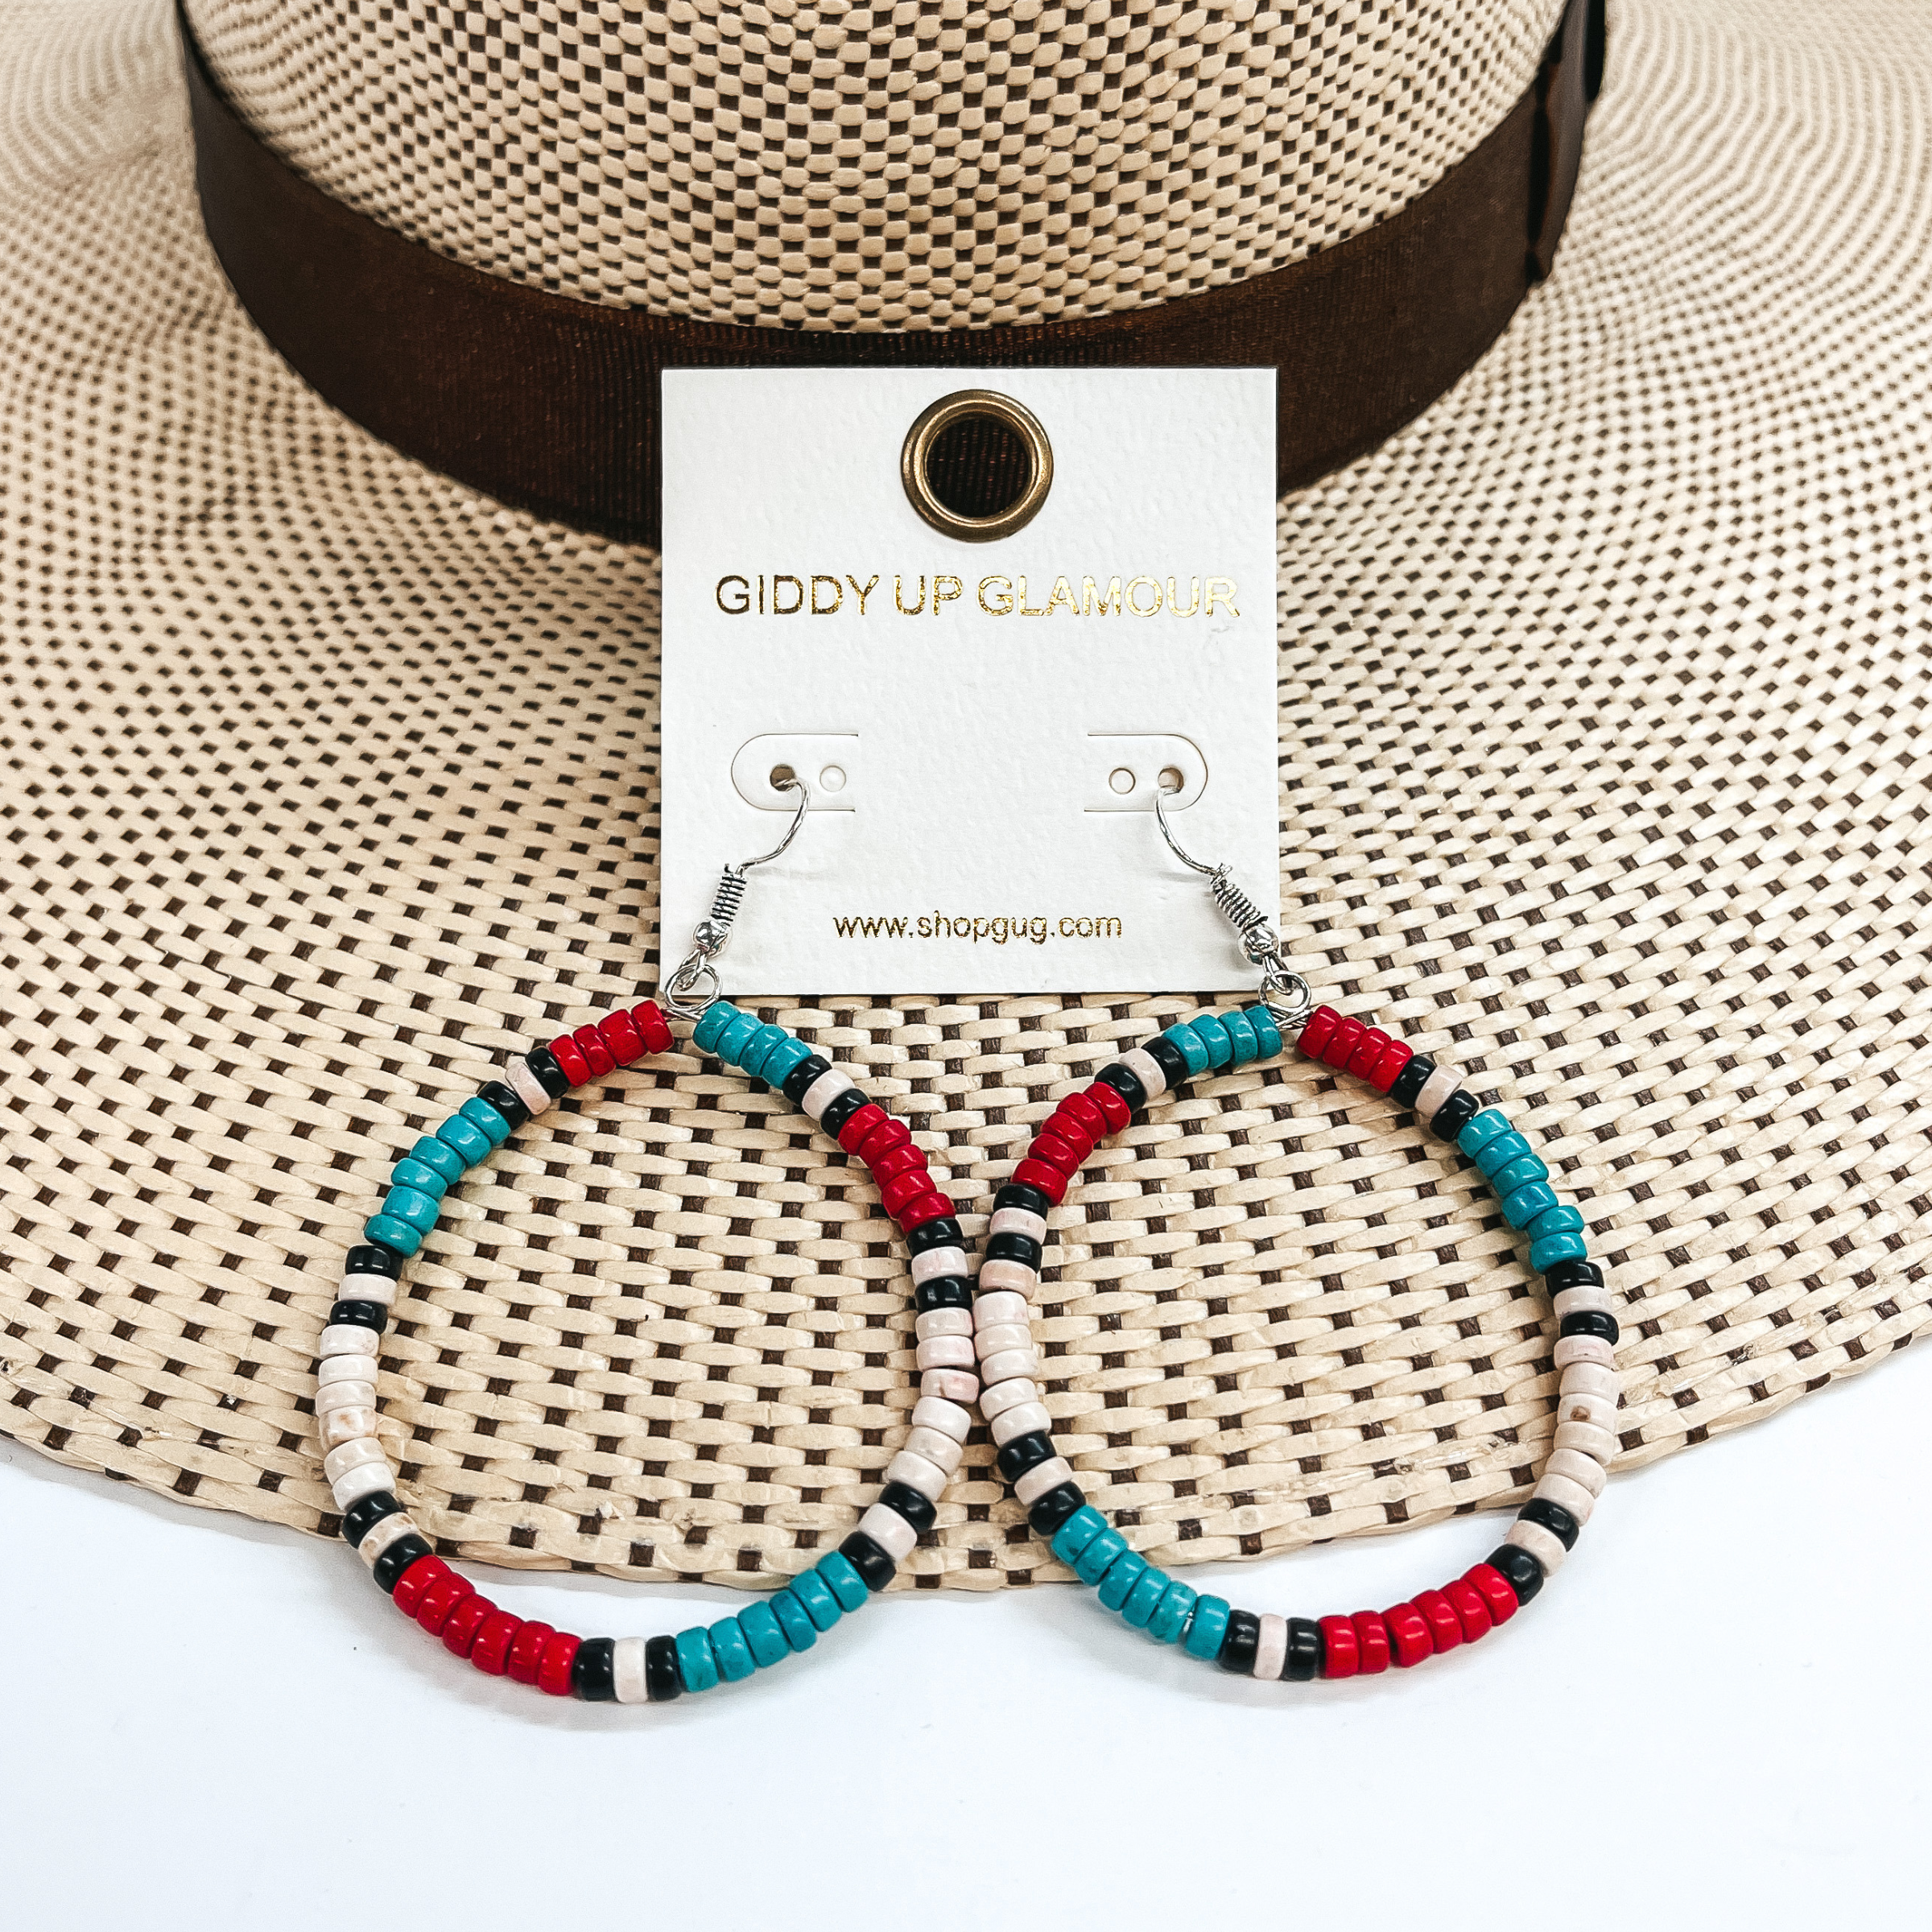 These are circle hoop earrings with multicolored  beads  all around. The beads are red, turquoise, ivory and  black. These earrings are taken on a straw hat brim  and a white background.